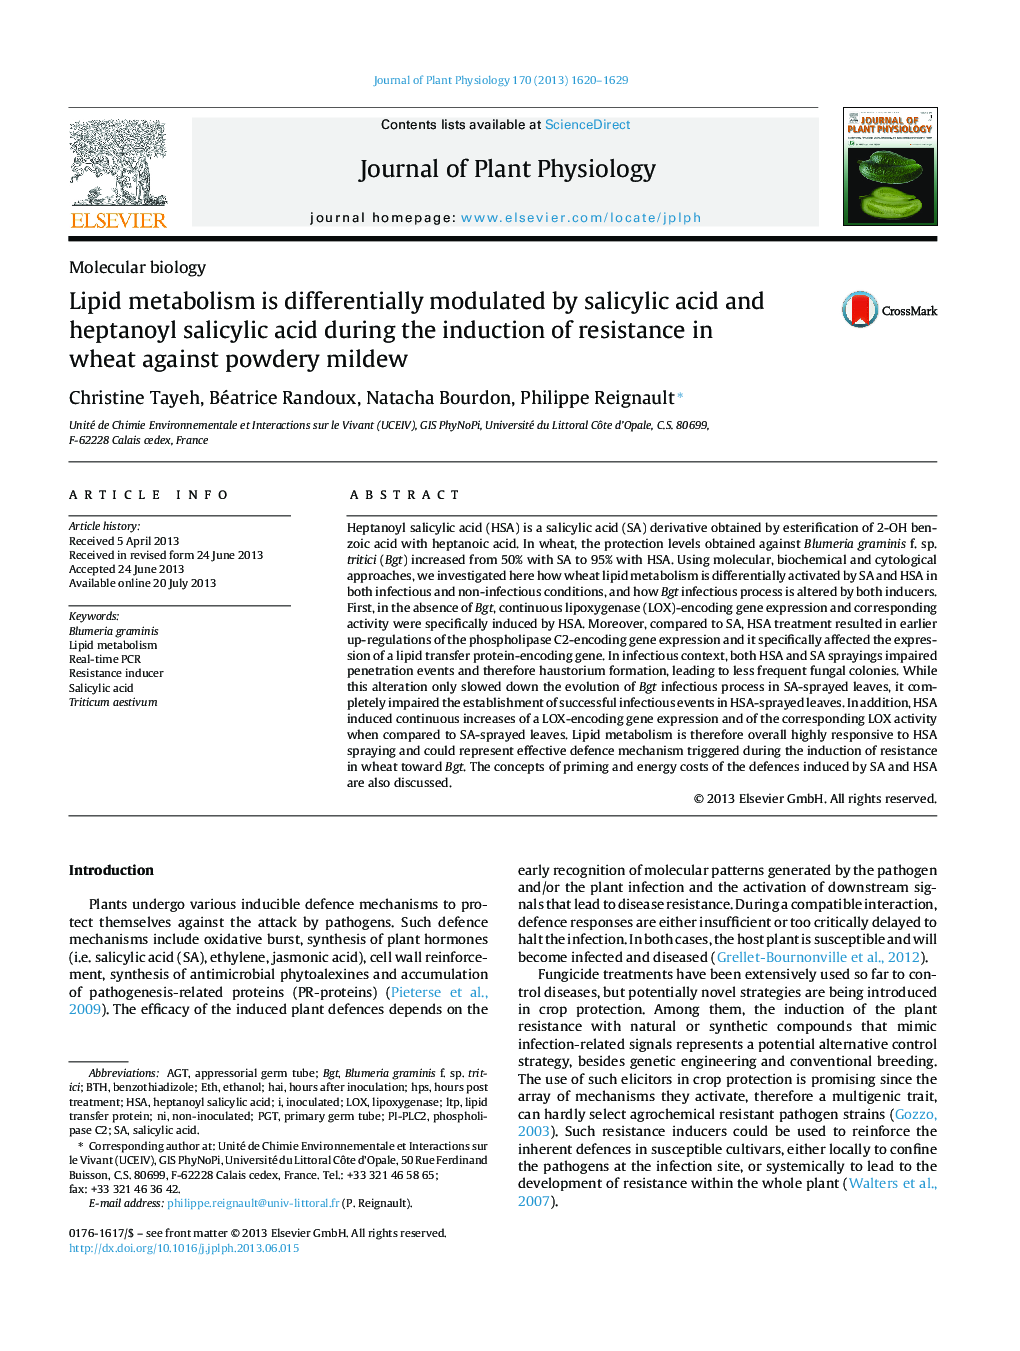 Lipid metabolism is differentially modulated by salicylic acid and heptanoyl salicylic acid during the induction of resistance in wheat against powdery mildew